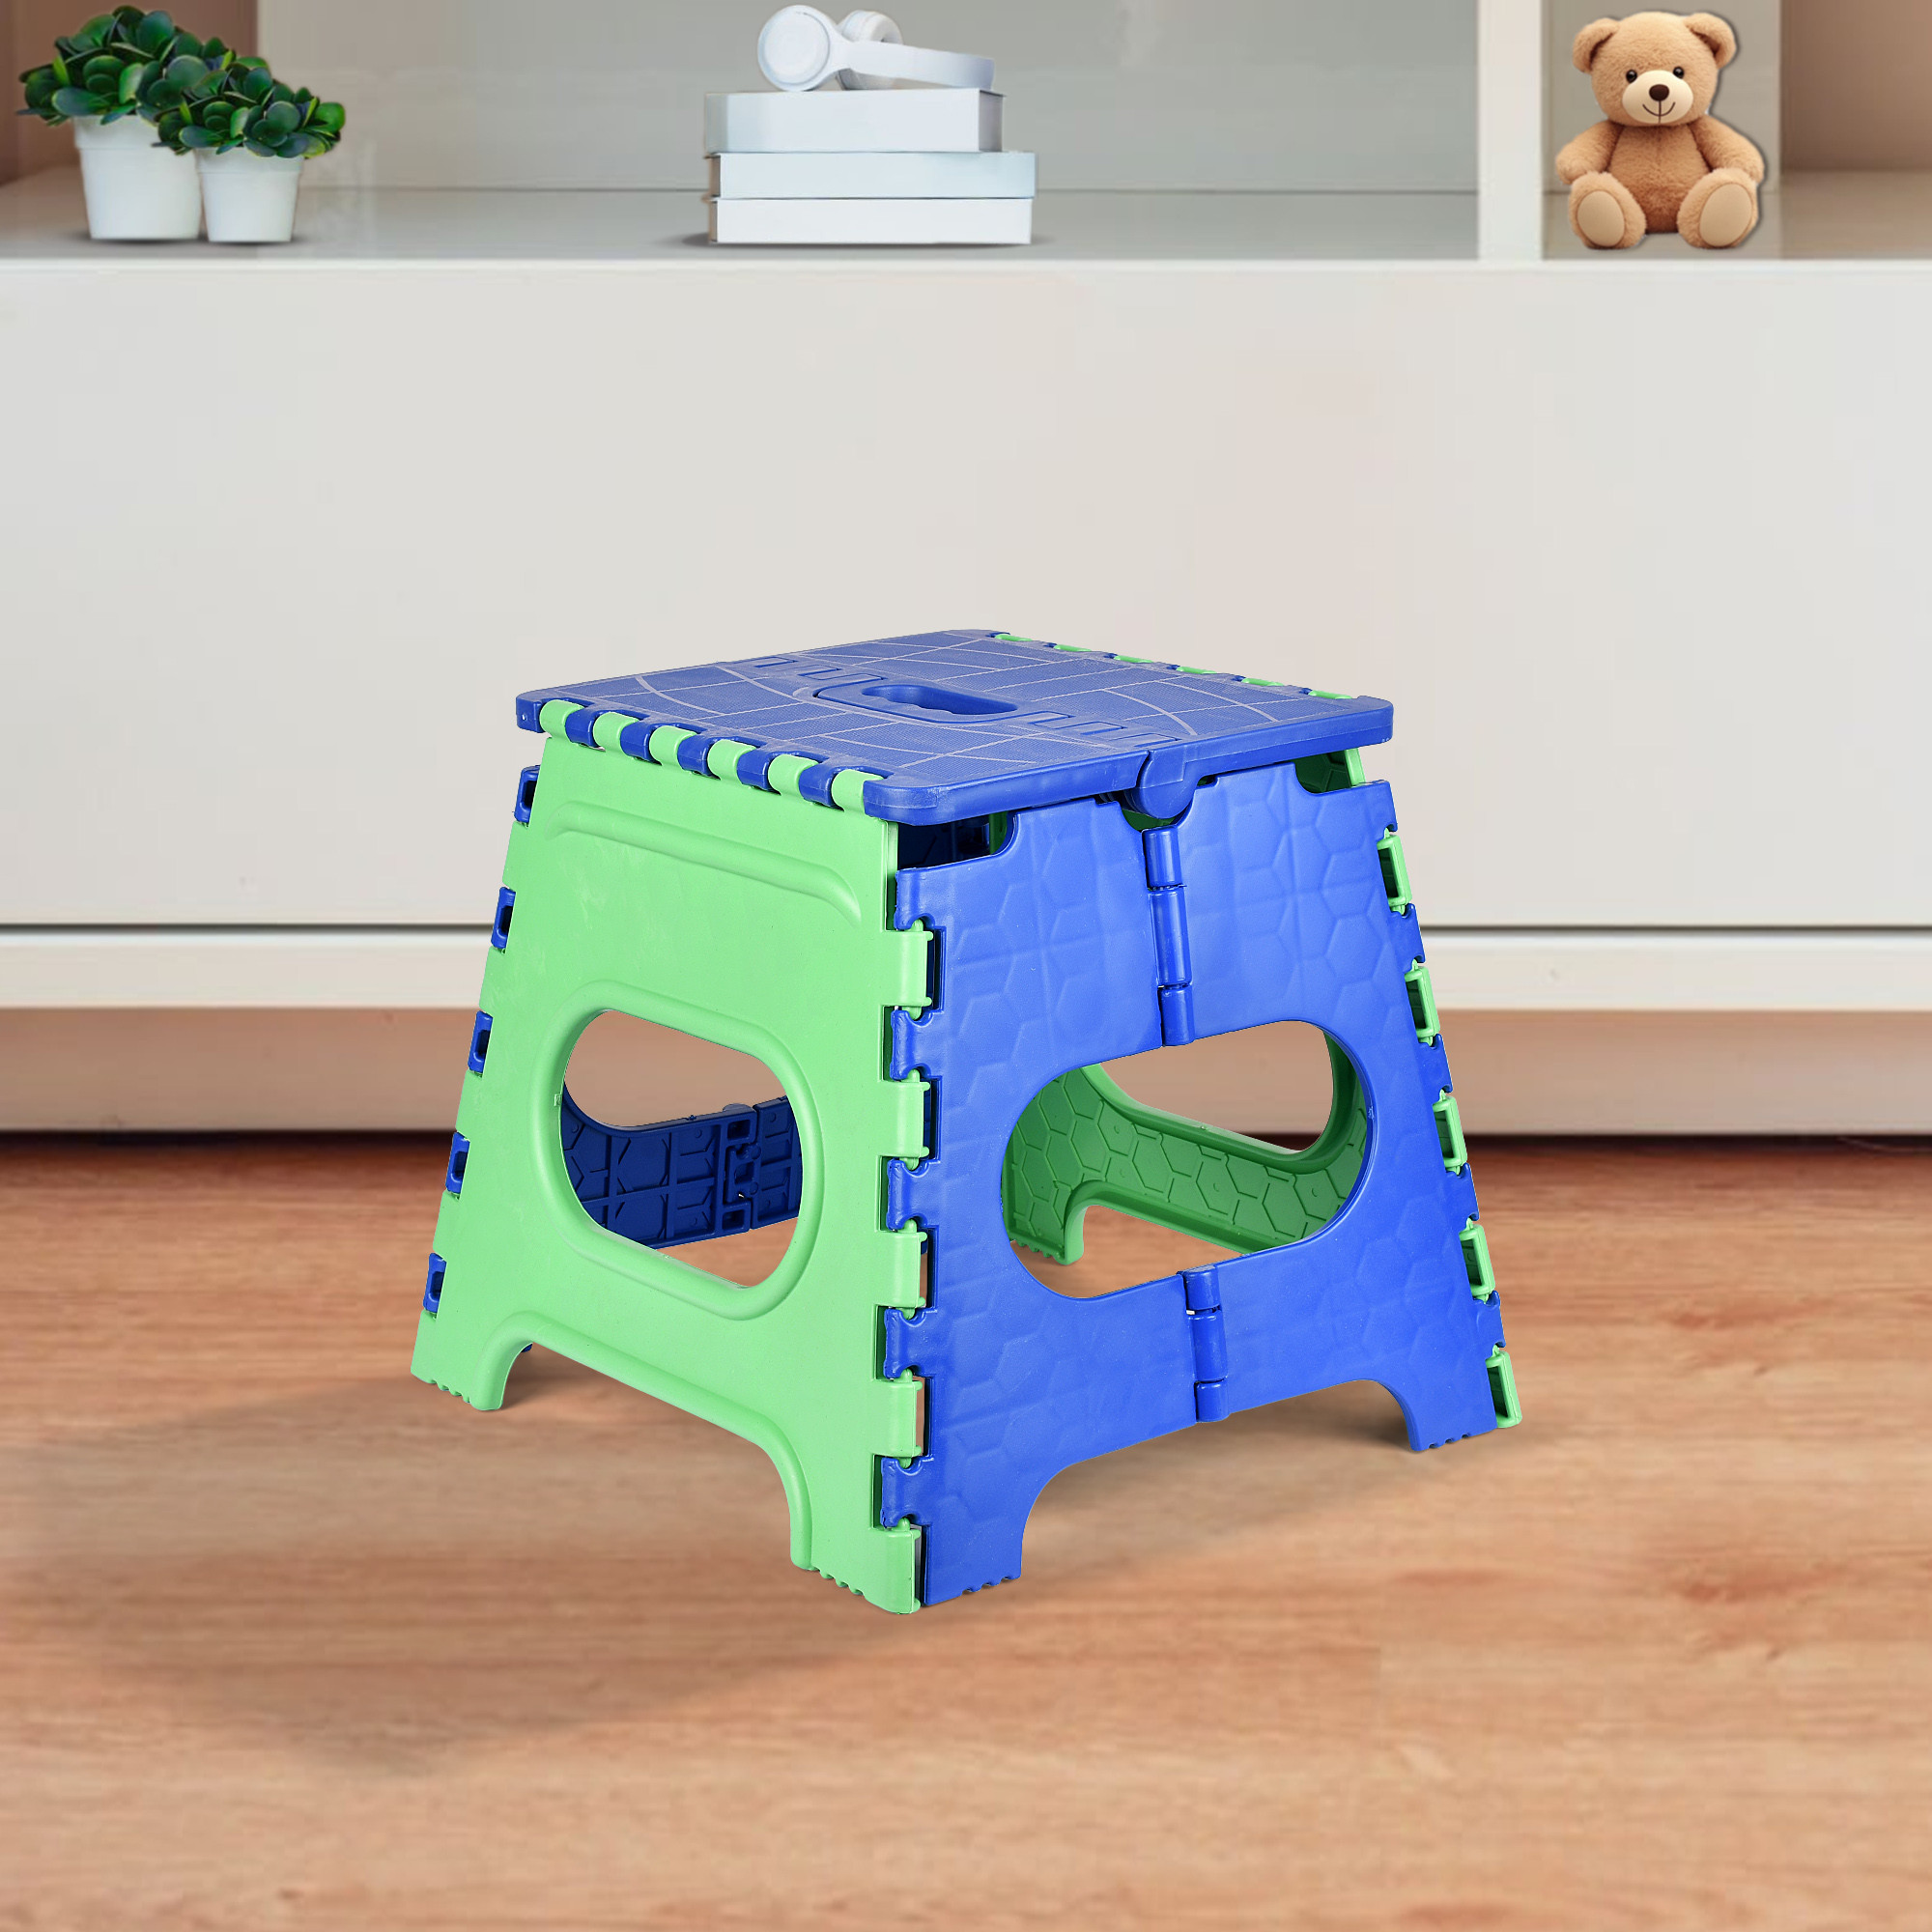 Kuber Industries Stool | Foldable Stool | Collapsible Camping Chair | Stool for Outdoor-Fishing-Hiking-Gardening-Travel | Portable Stool | Multipurpose Sitting Stool | Small | Green & Blue